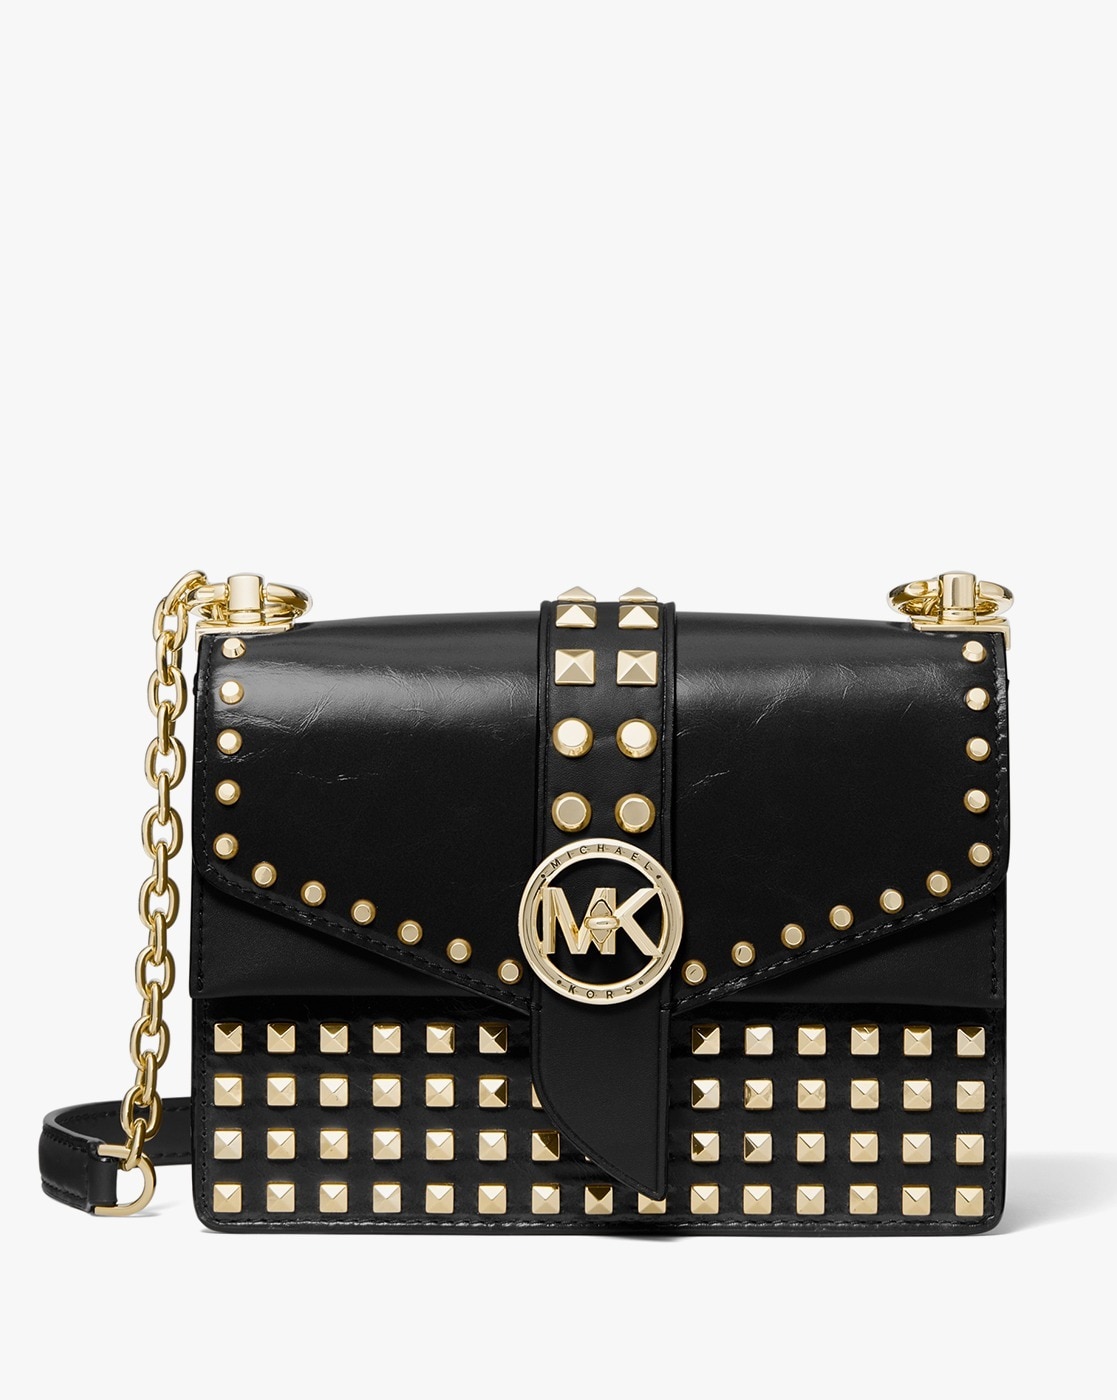 MICHAEL KORS ~Greenwich Small Leather Convertible South Pacific